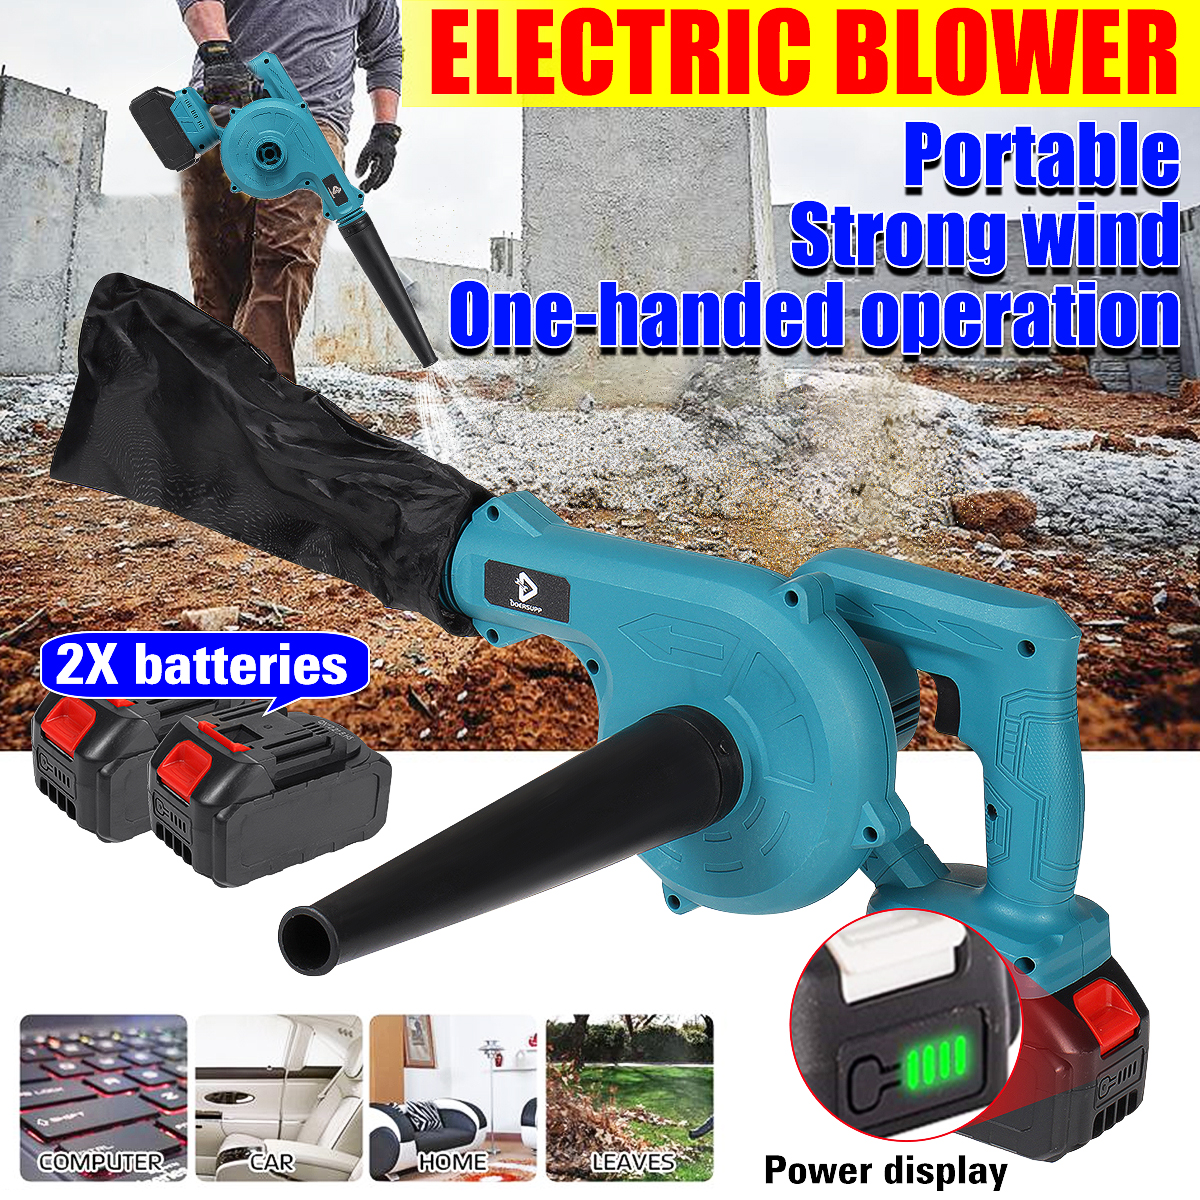 Doersupp-2-IN-1-Cordless-Electric-Air-Blower-Vacuum-Computer-Dust-Cleaner-Leaf-Blower-Battery-Displa-1860679-1